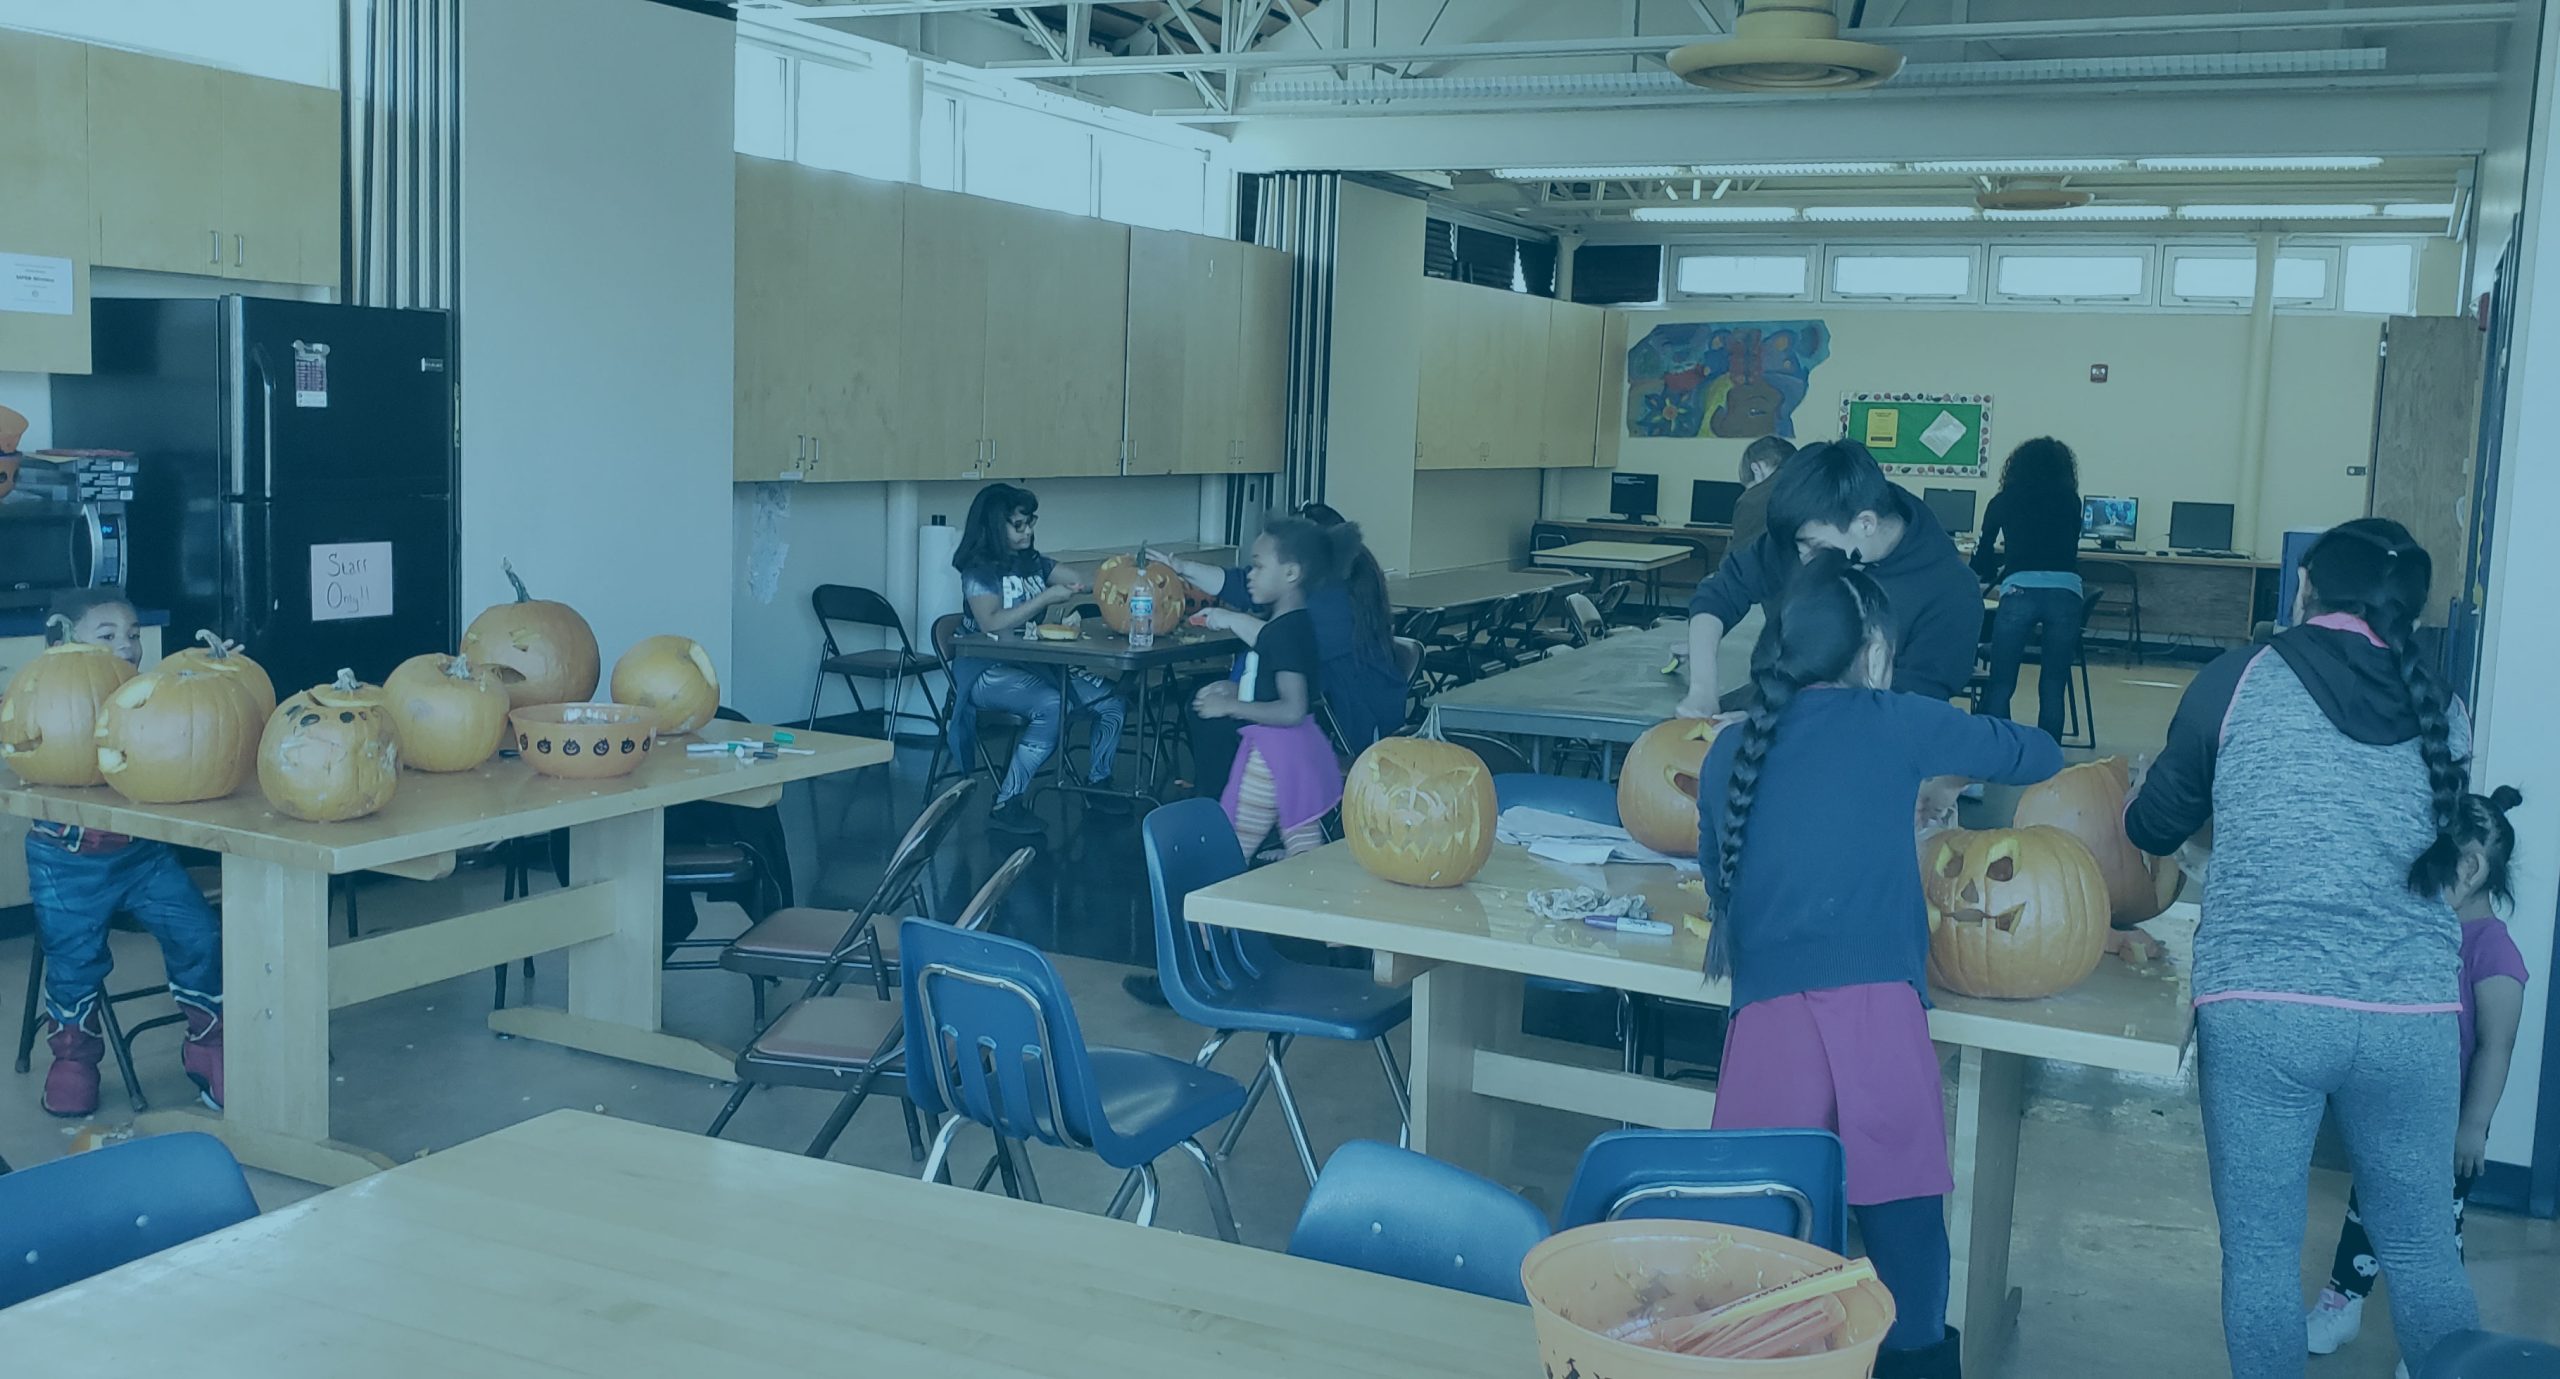 Students in a classroom carving pumpkins, with a dark light blue overlay